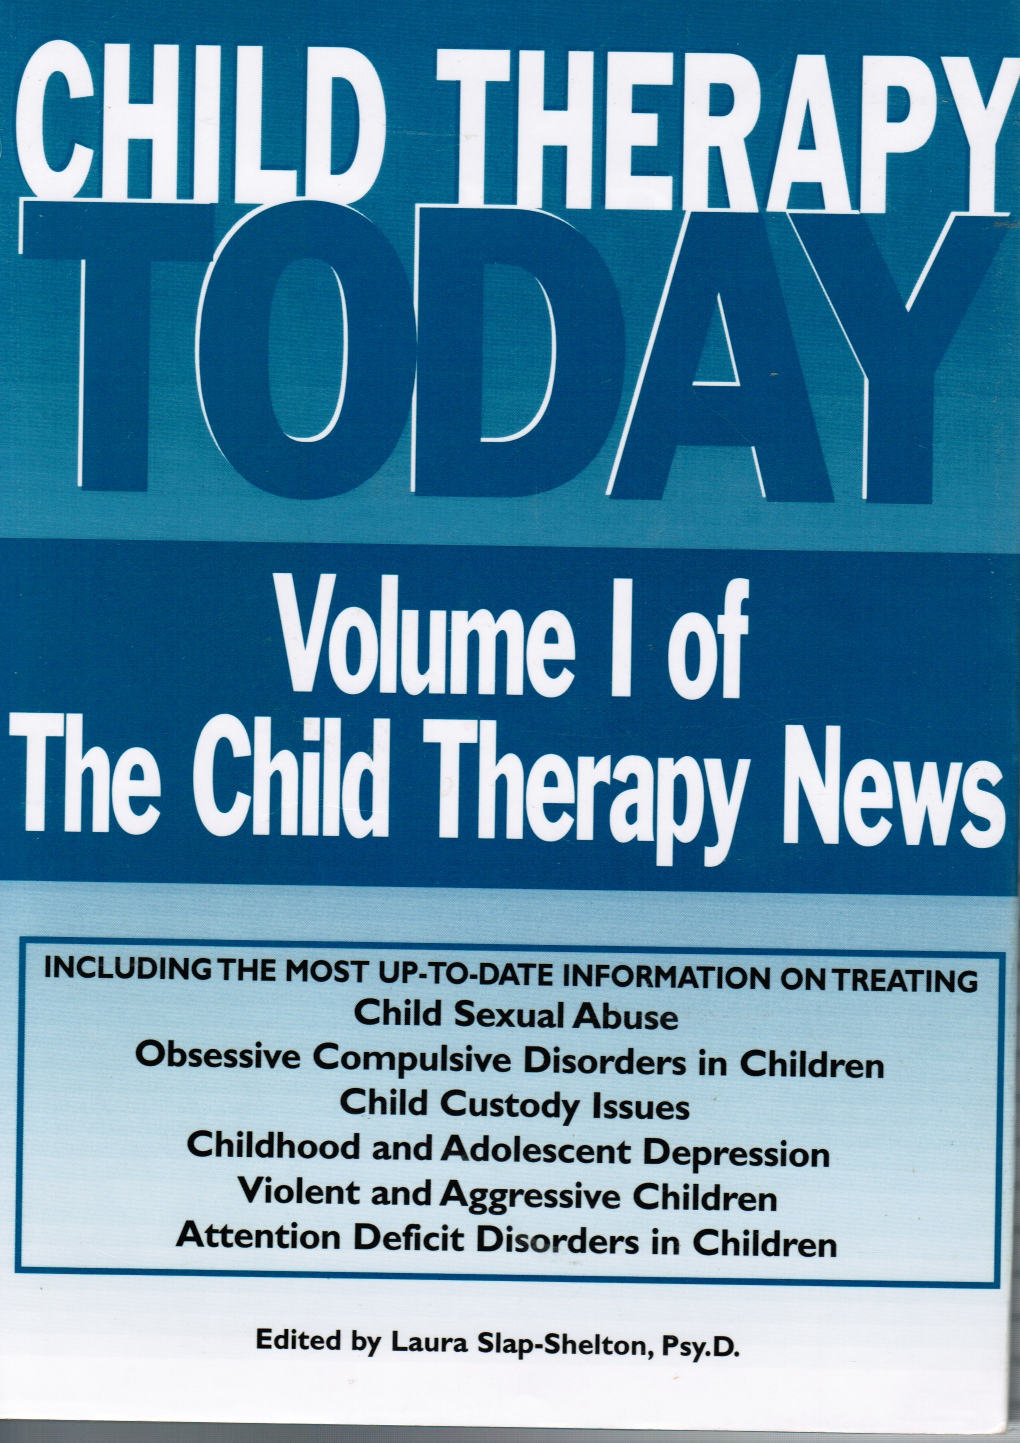 (EDITOR) , GOLD ROBERT S. - Child Therapy Today : Volume I of the Child Therapy News